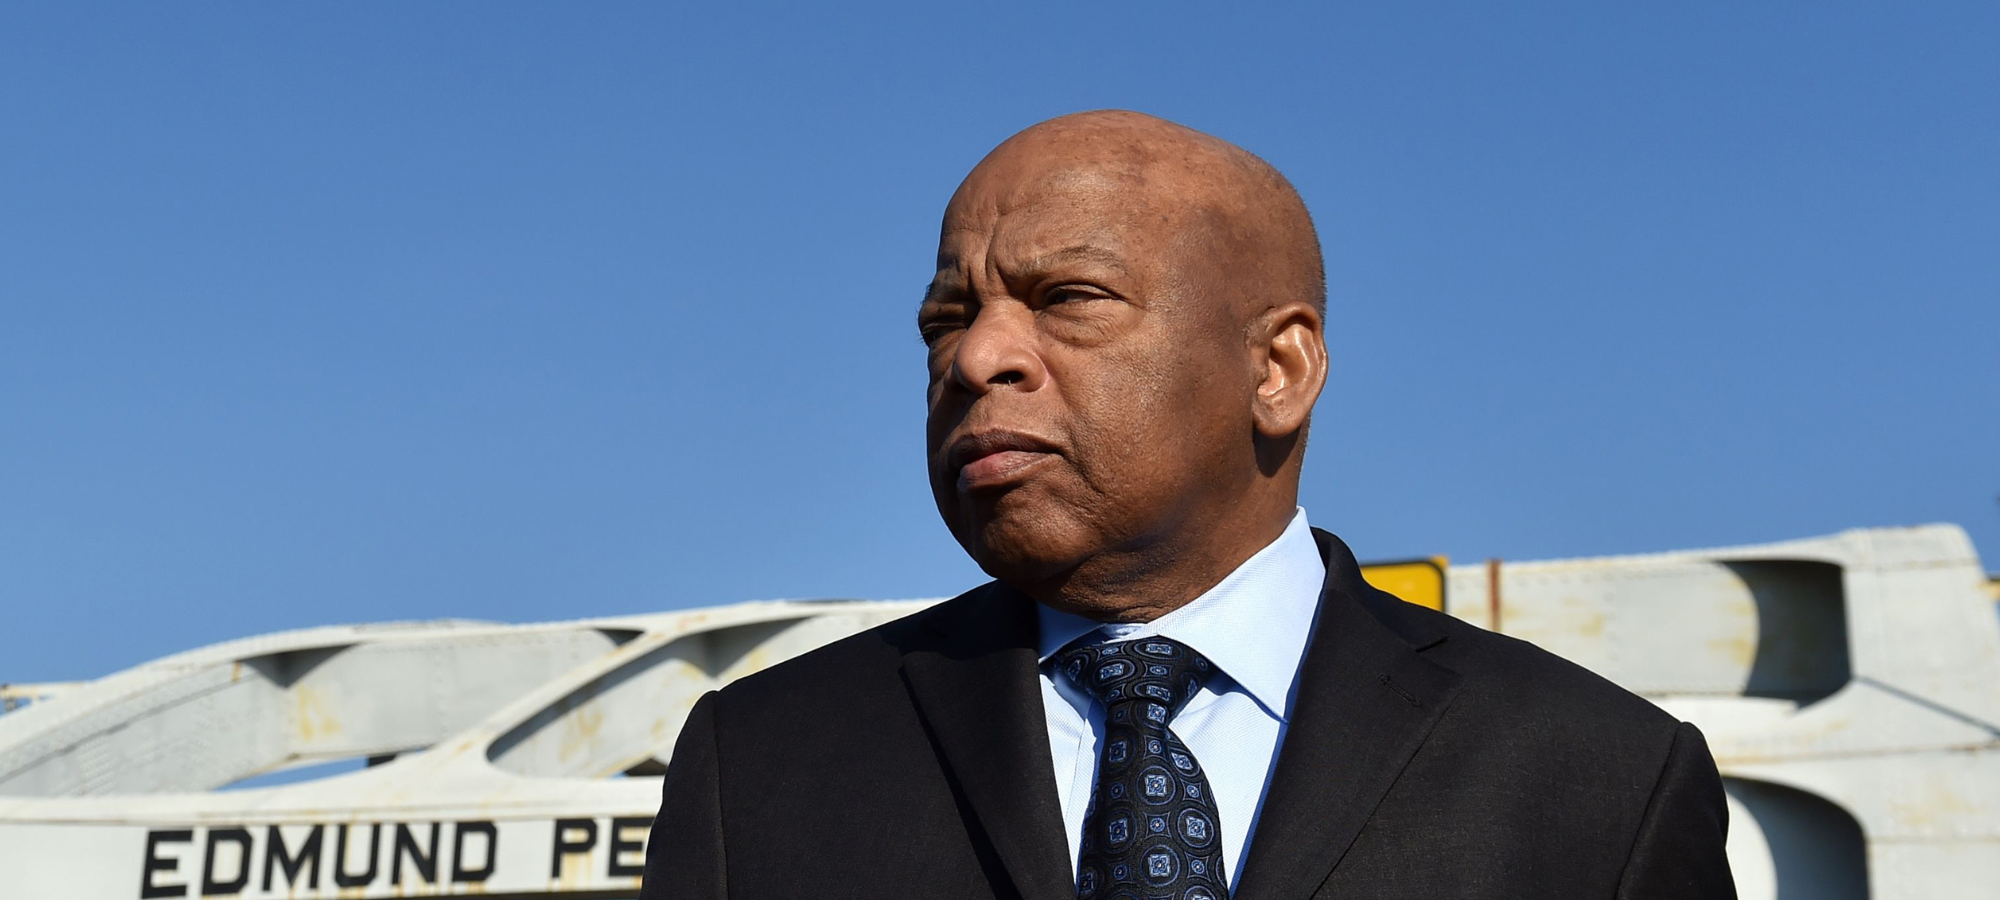 Opinion: Let’s keep pushing to create the ‘Beloved Community’ John Lewis wanted